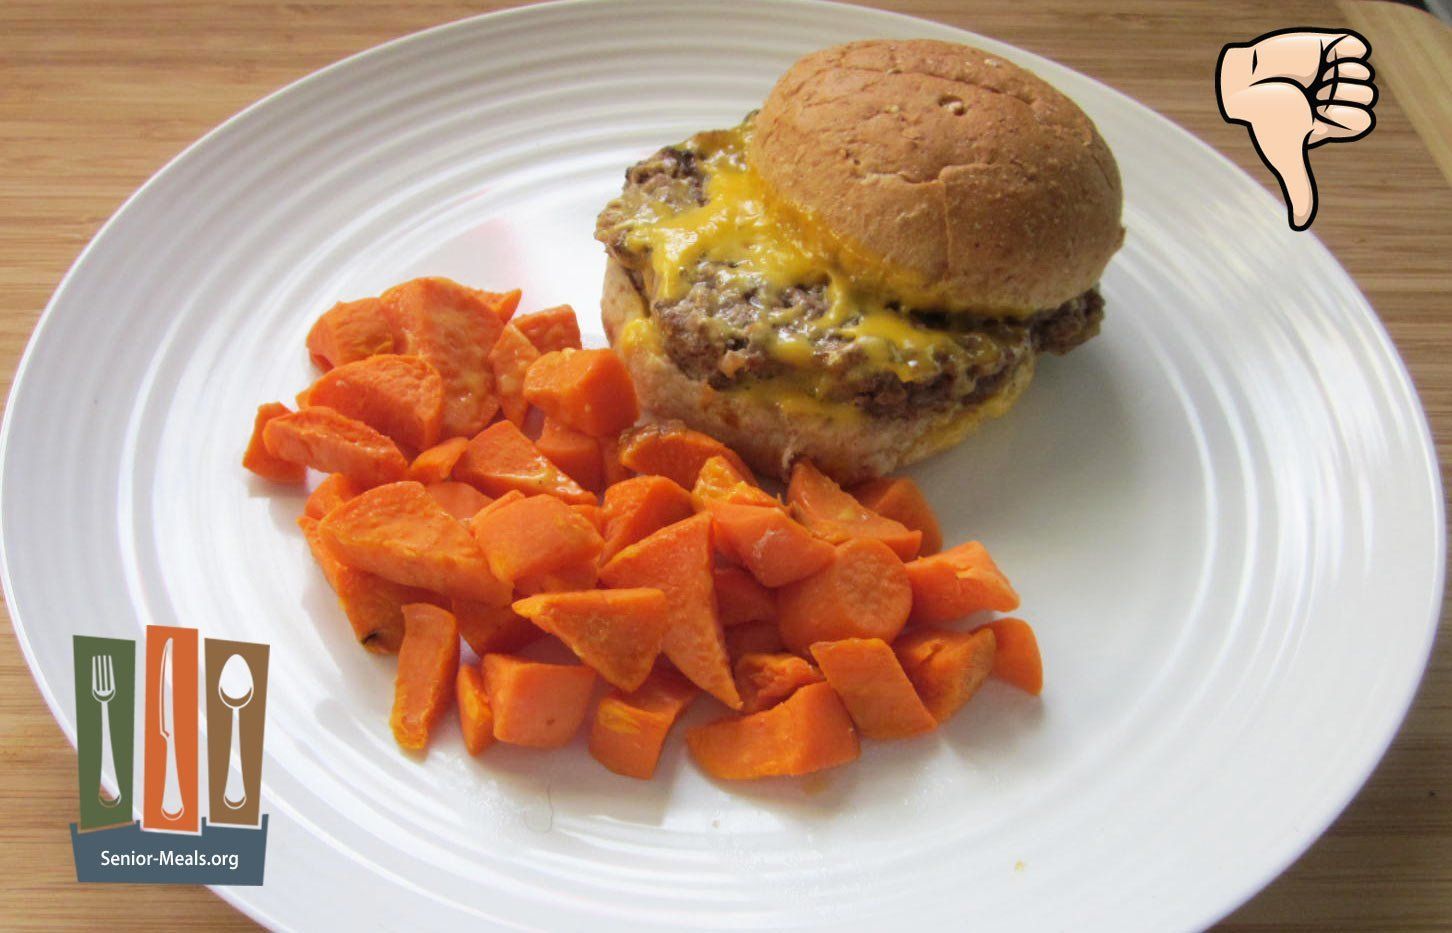 Homestyle Cheeseburger  - This is not Good at all. The Bun reheated Crispy-Hard, The Processed Burger Seemed Cheap to us, and there were no Green Vegetables to make this a Complete Meal.